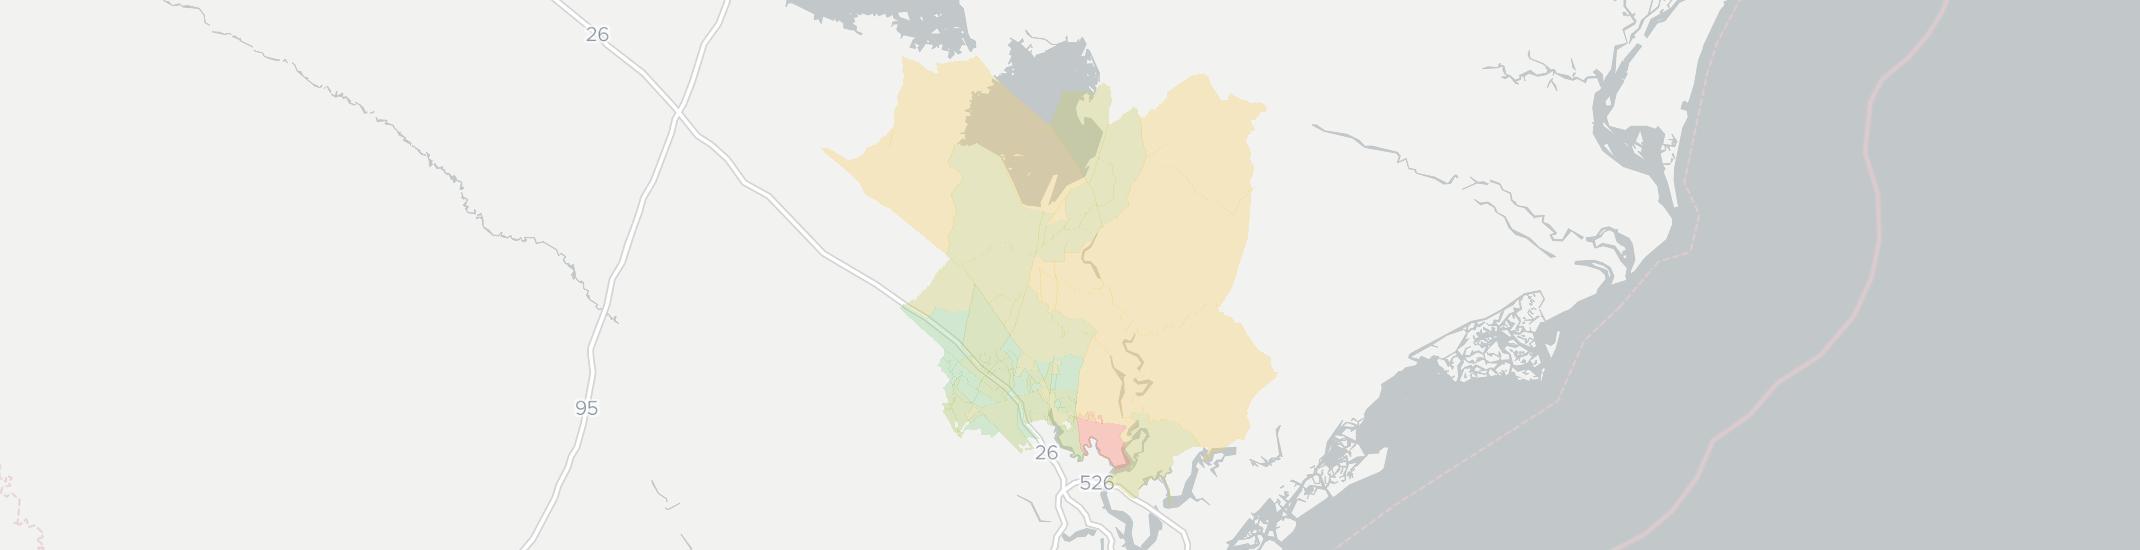 Moncks Corner Internet Competition Map. Click for interactive map.